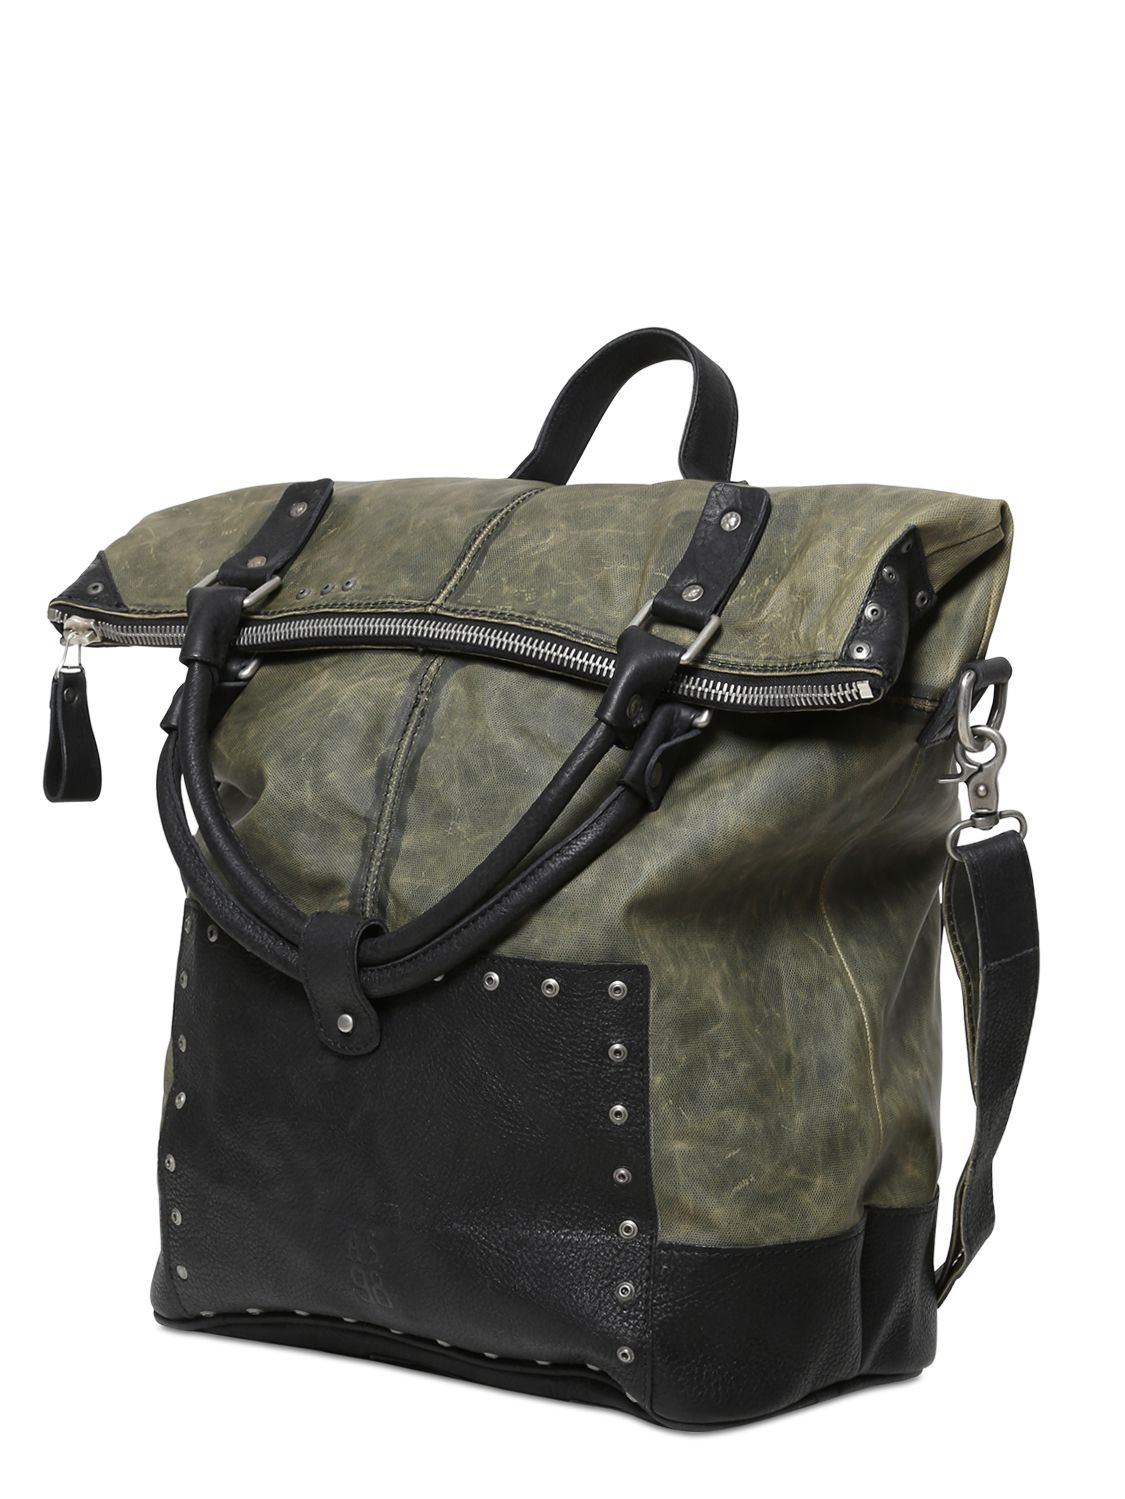 A.s.98 Waxed Canvas & Leather Backpack in Green for Men - Lyst